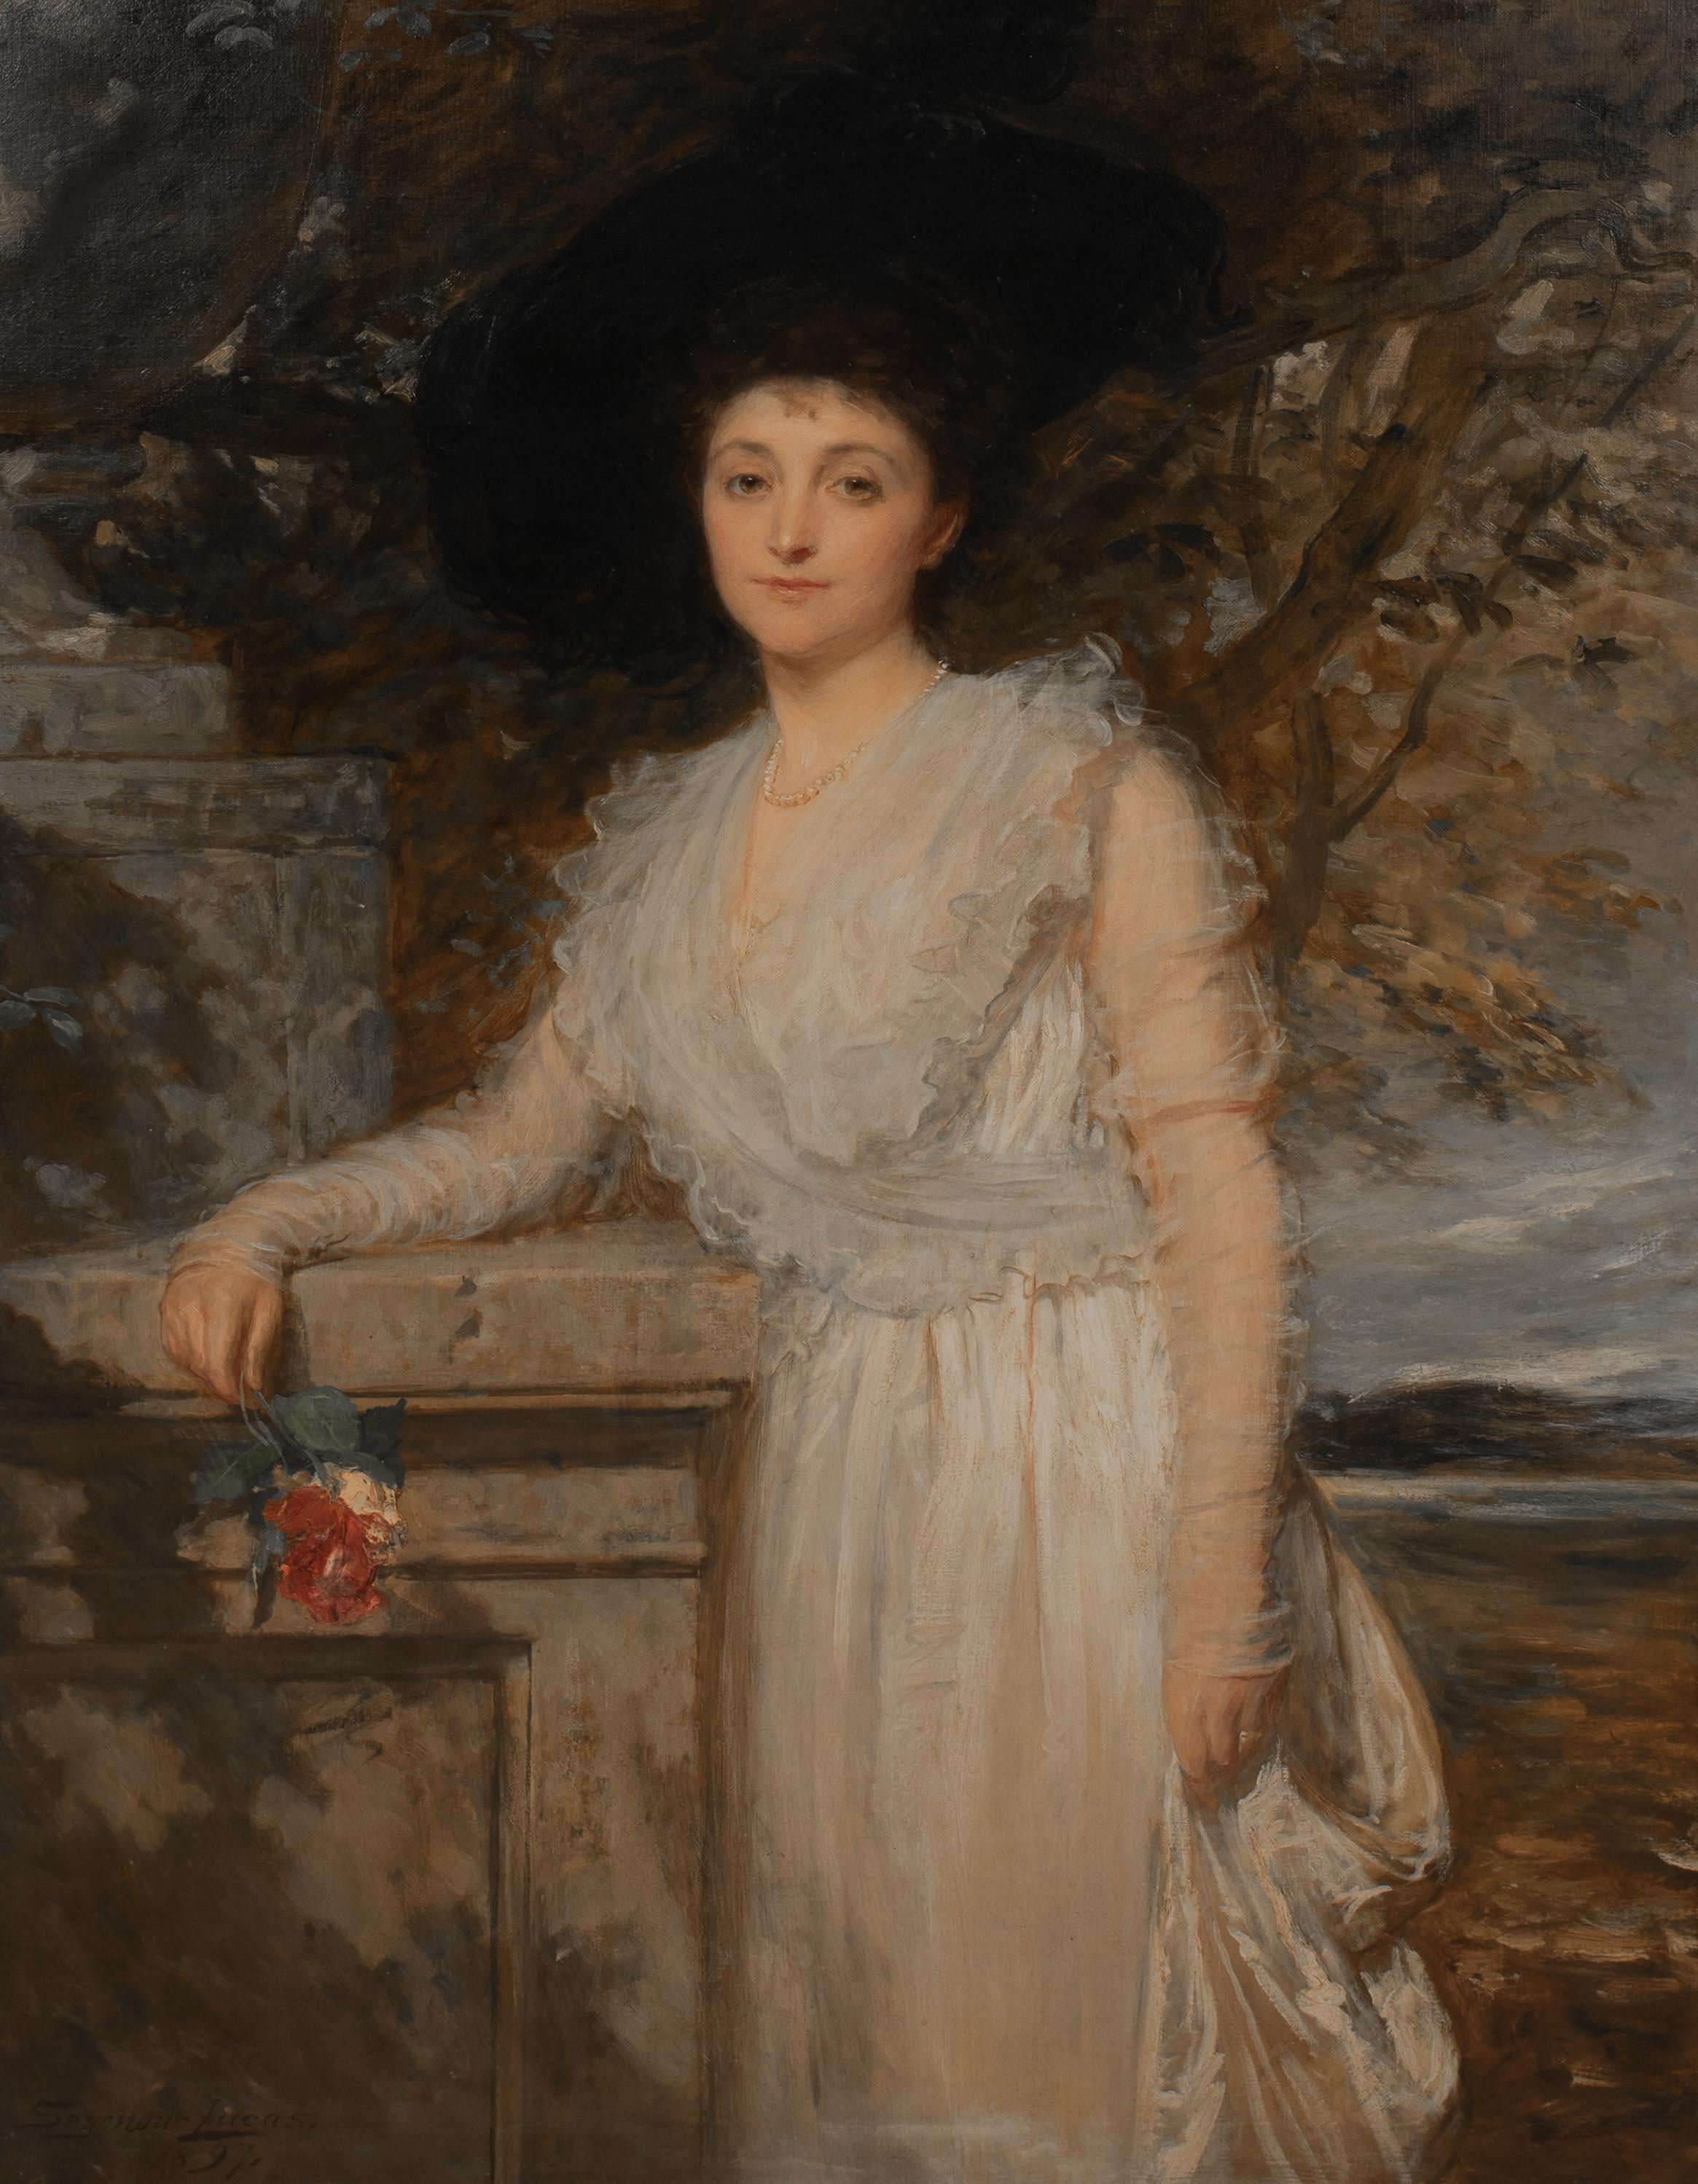 Portrait Of Mrs Louisa Hartley Tooth (nee Beningfield) Of West Hampstead, dated 1897

Exhibited: London, Royal Academy, 1897, no.422

by John Seymour Lucas (1849-1923)

Huge 19th Century three quarter length portrait of Mrs Louise Hartley Tooth, oil